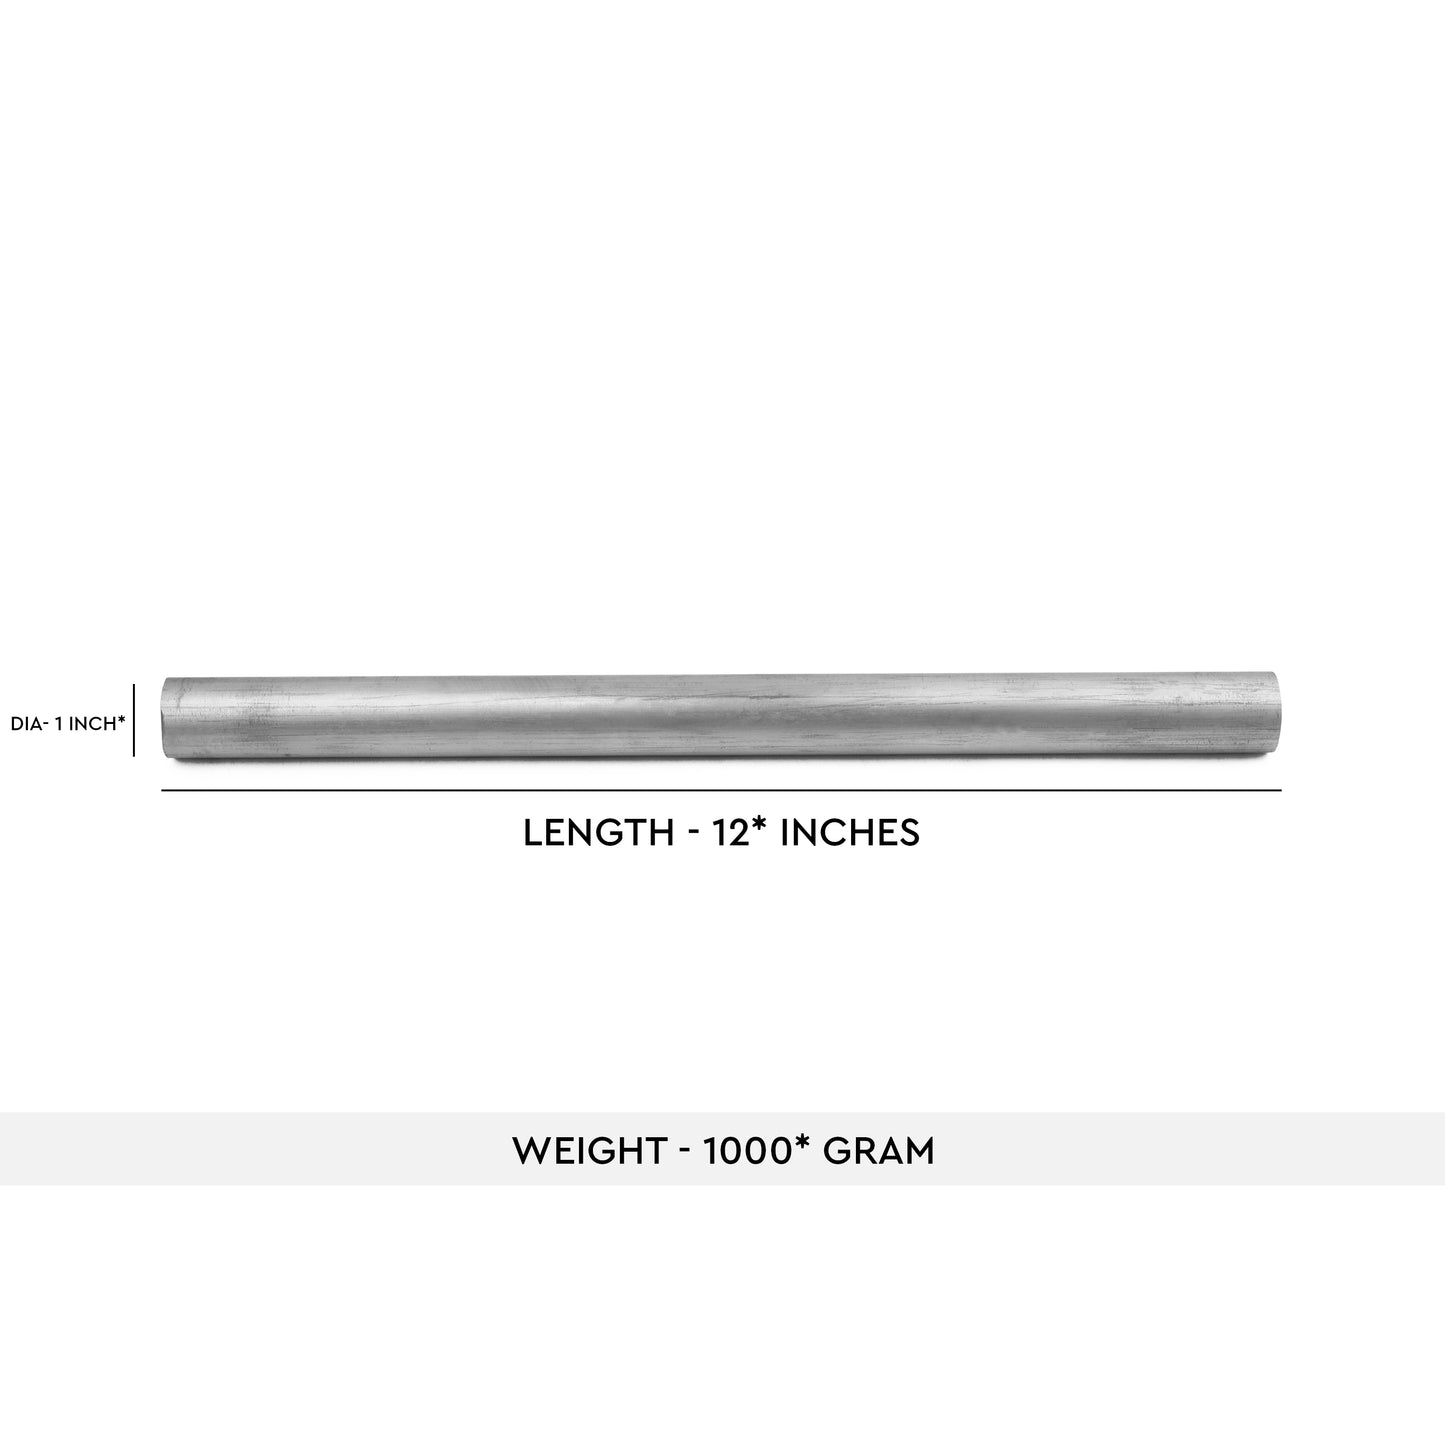 STAINLESS STEEL 12 INCH VIRTUAL ROD